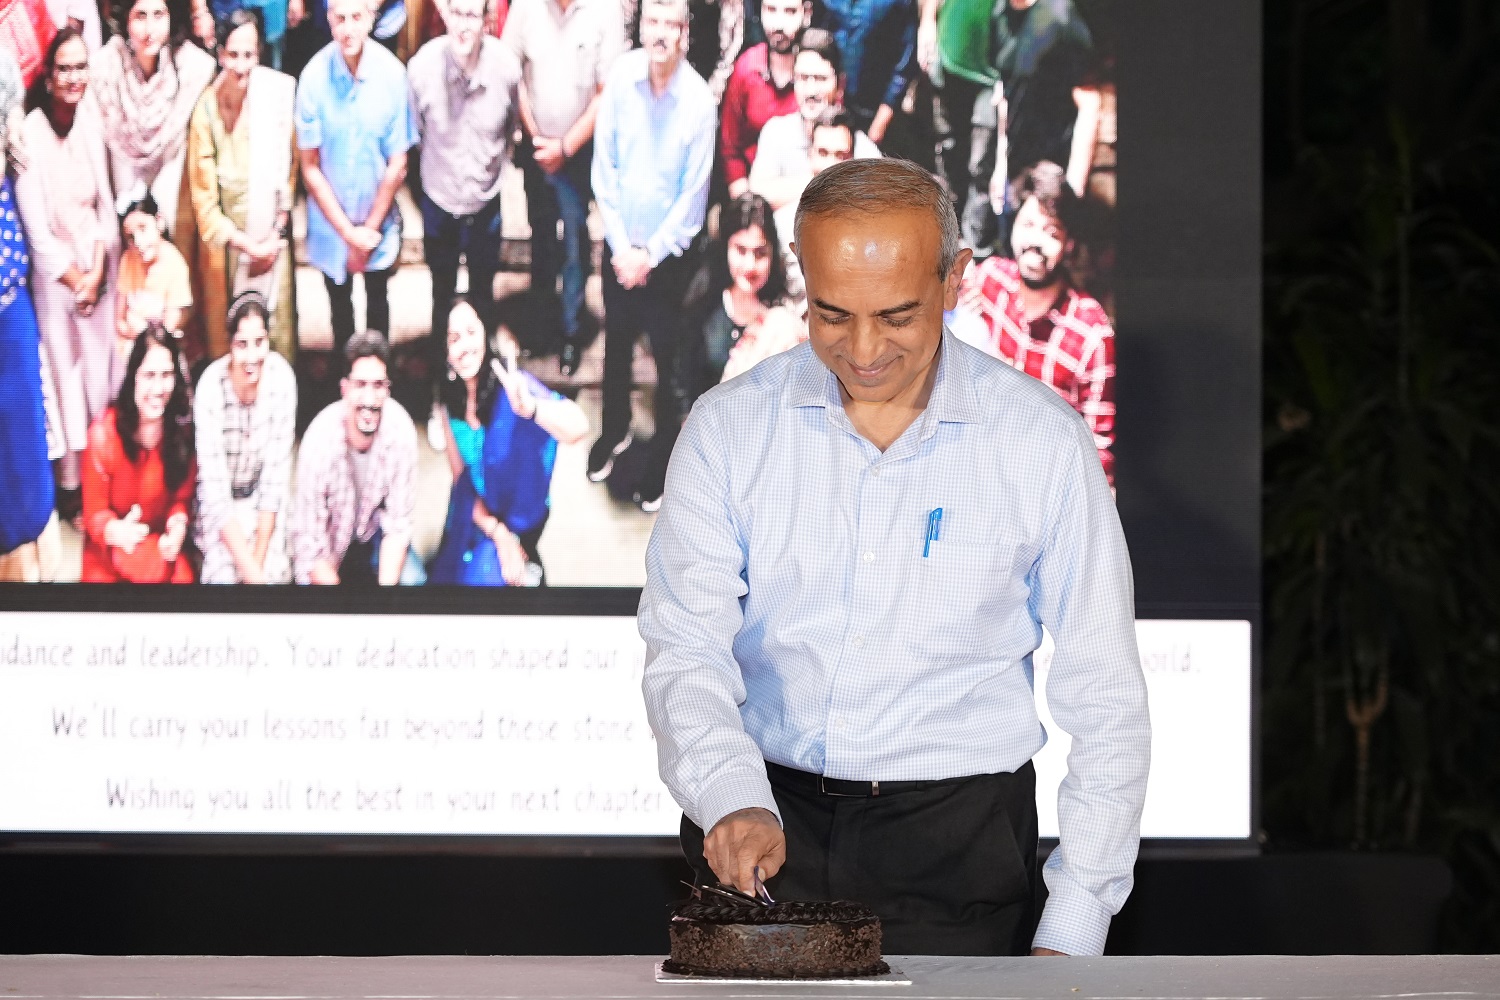 EPGP students organized a cake-cutting ceremony to bid farewell to Prof. Ashok Thampy in appreciation of his invaluable contributions as the Chairperson of the EPGP programme.